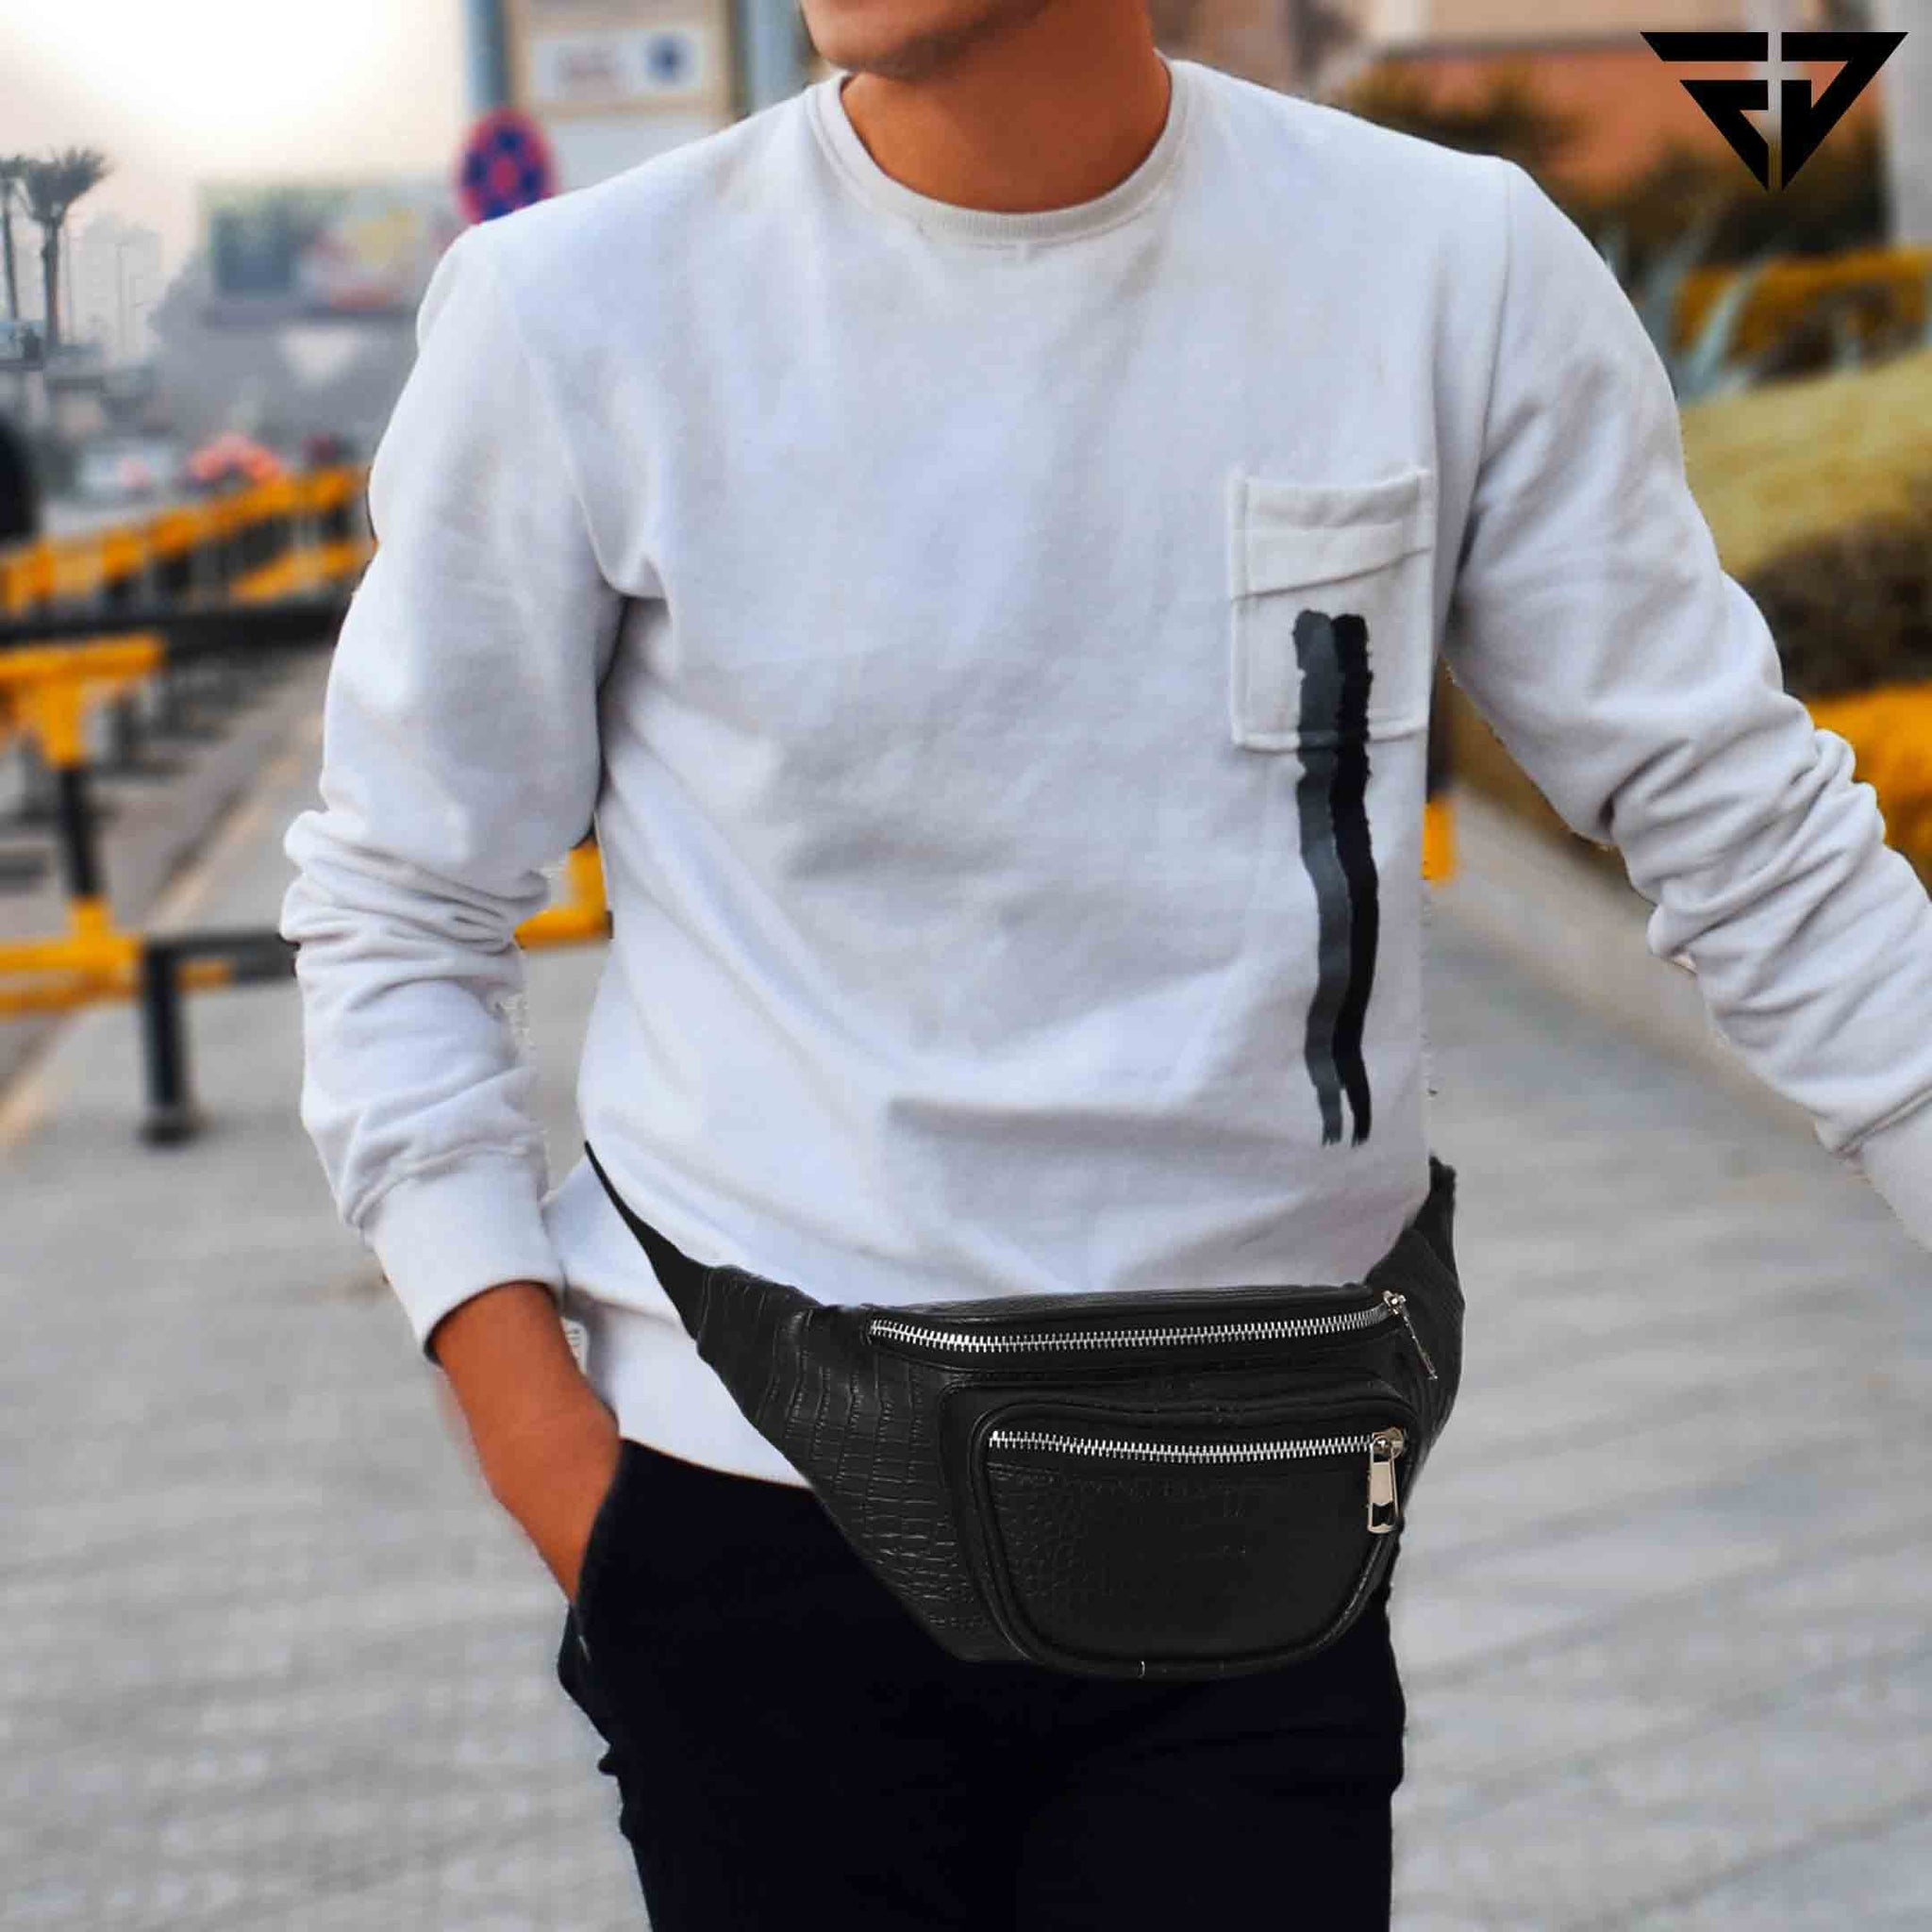 Black Textured Fanny Pack